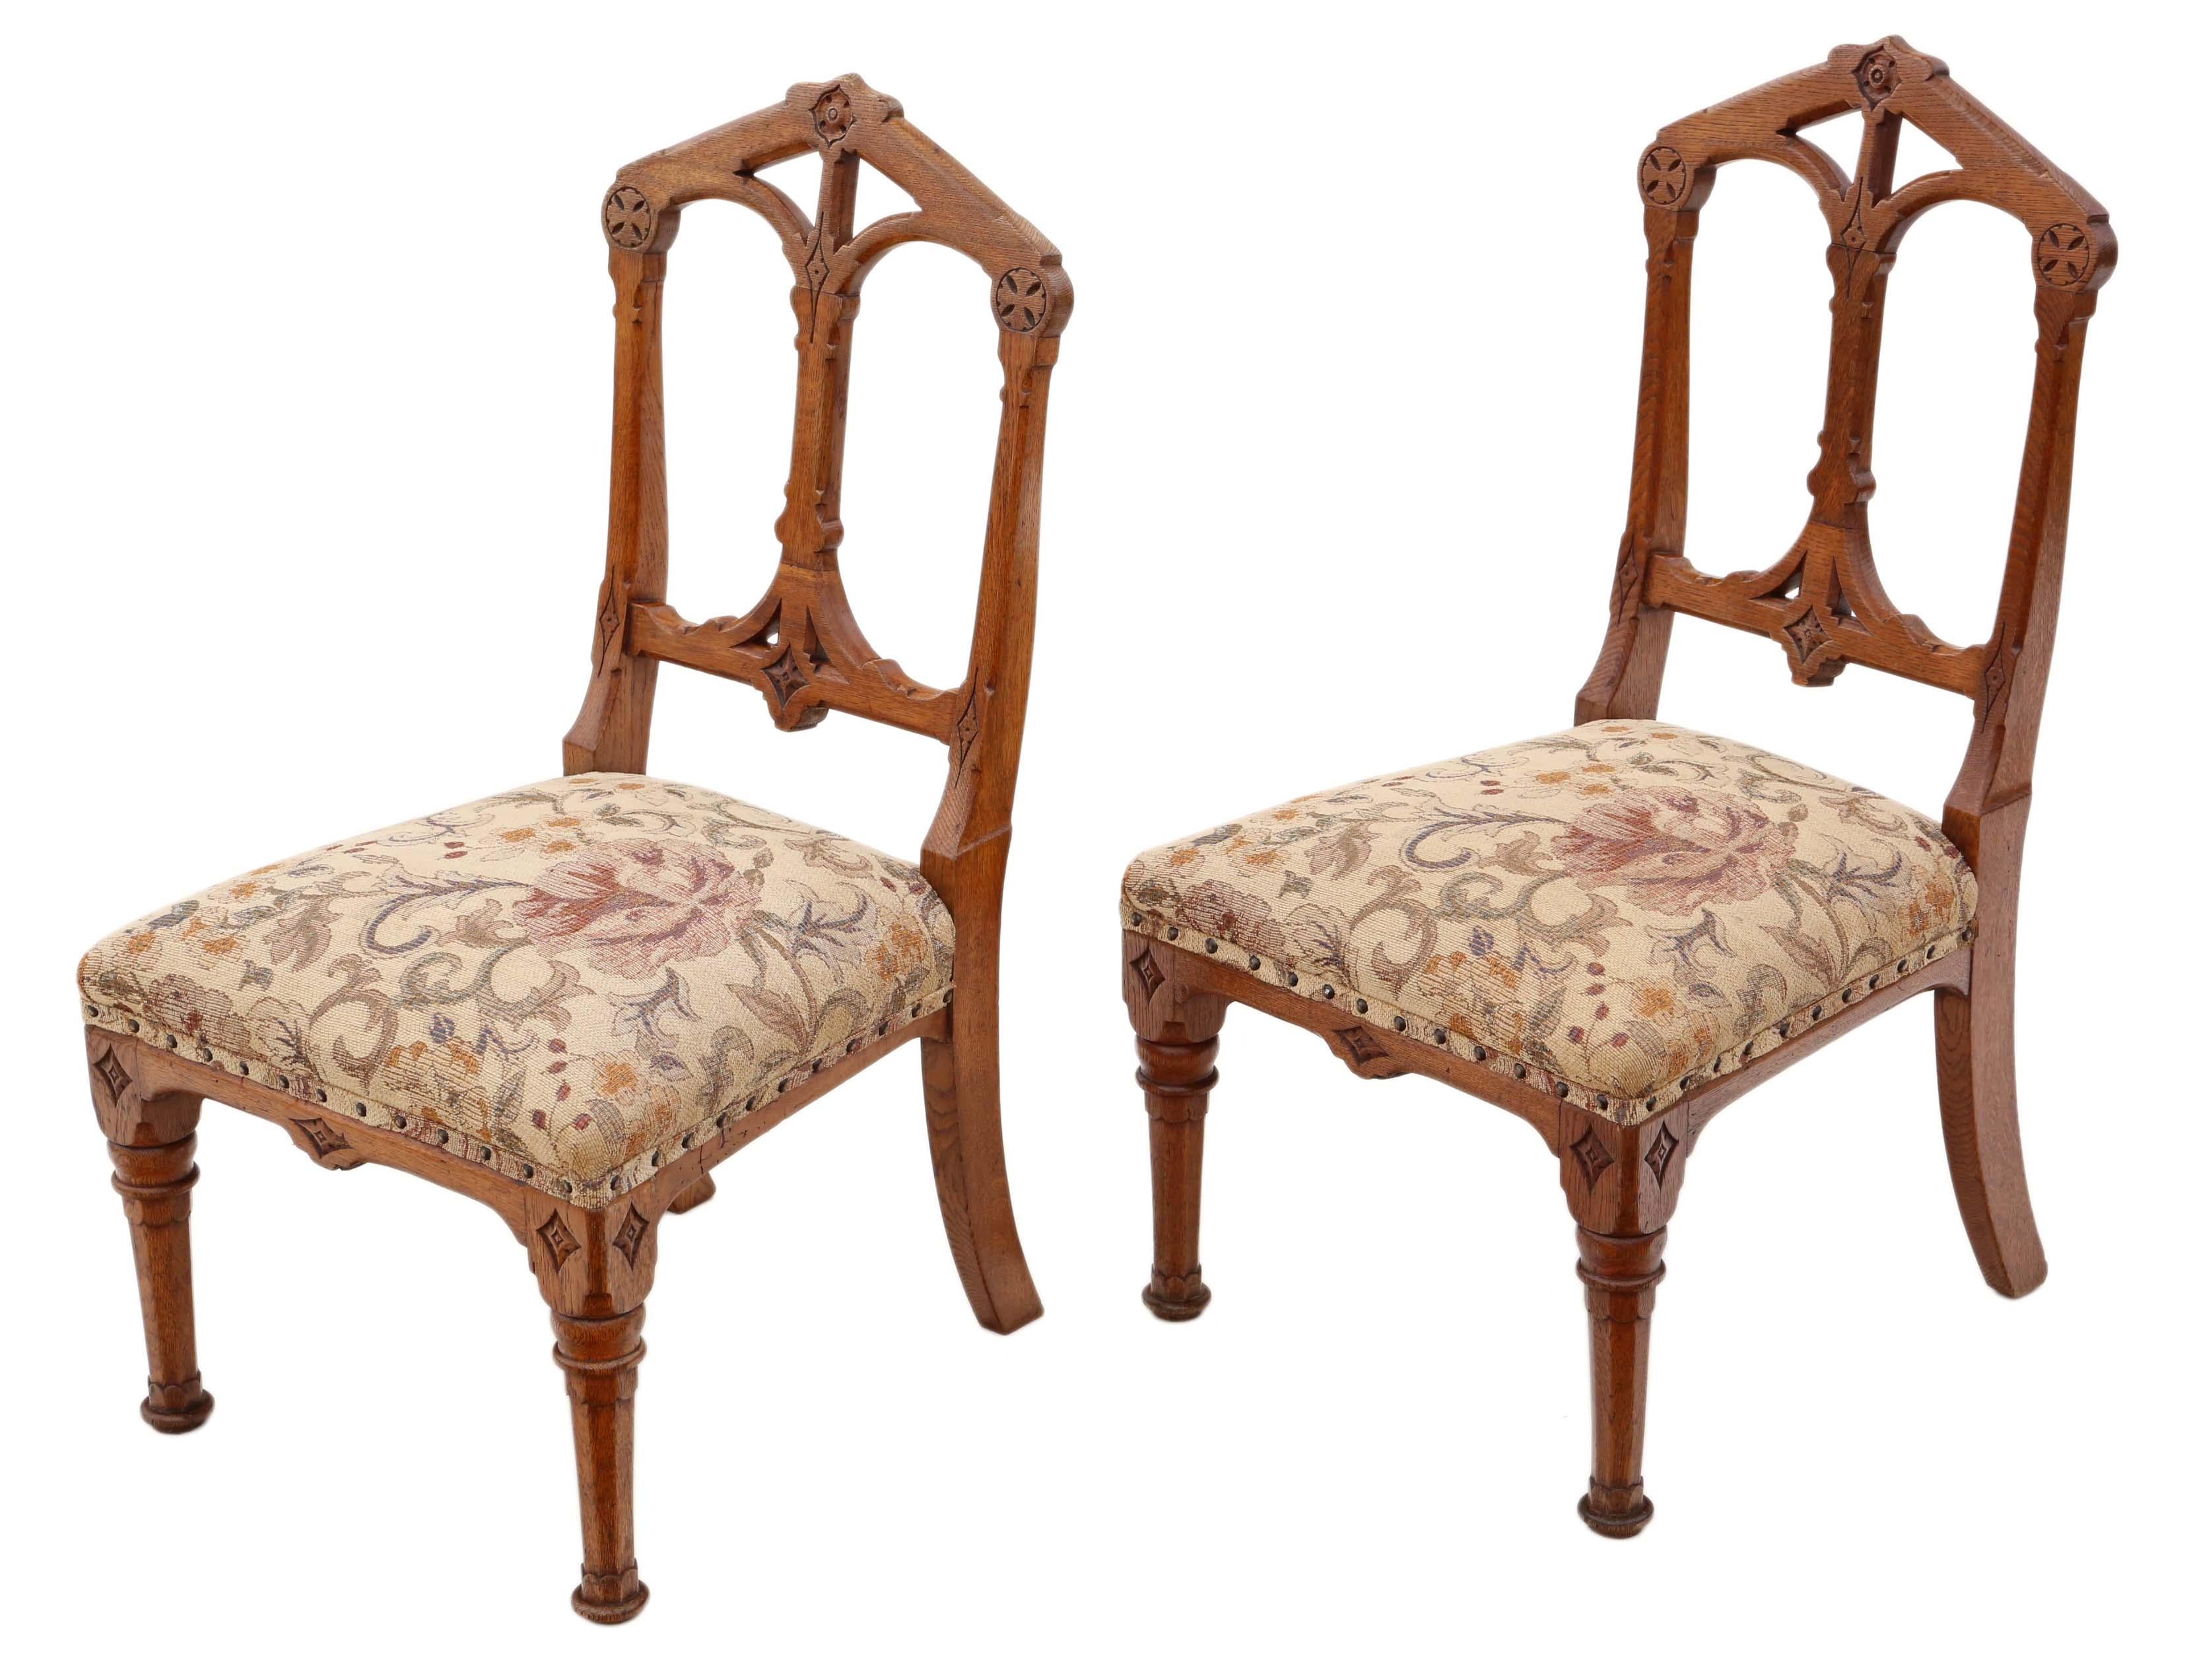 Antique quality pair of Gothic revival oak side hall bedroom chairs C1880. Lovely light golden colour to the oak frames and a fantastic Gothic design.

Solid, with no loose joints.

The upholstery is not new, but has no significant wear or major